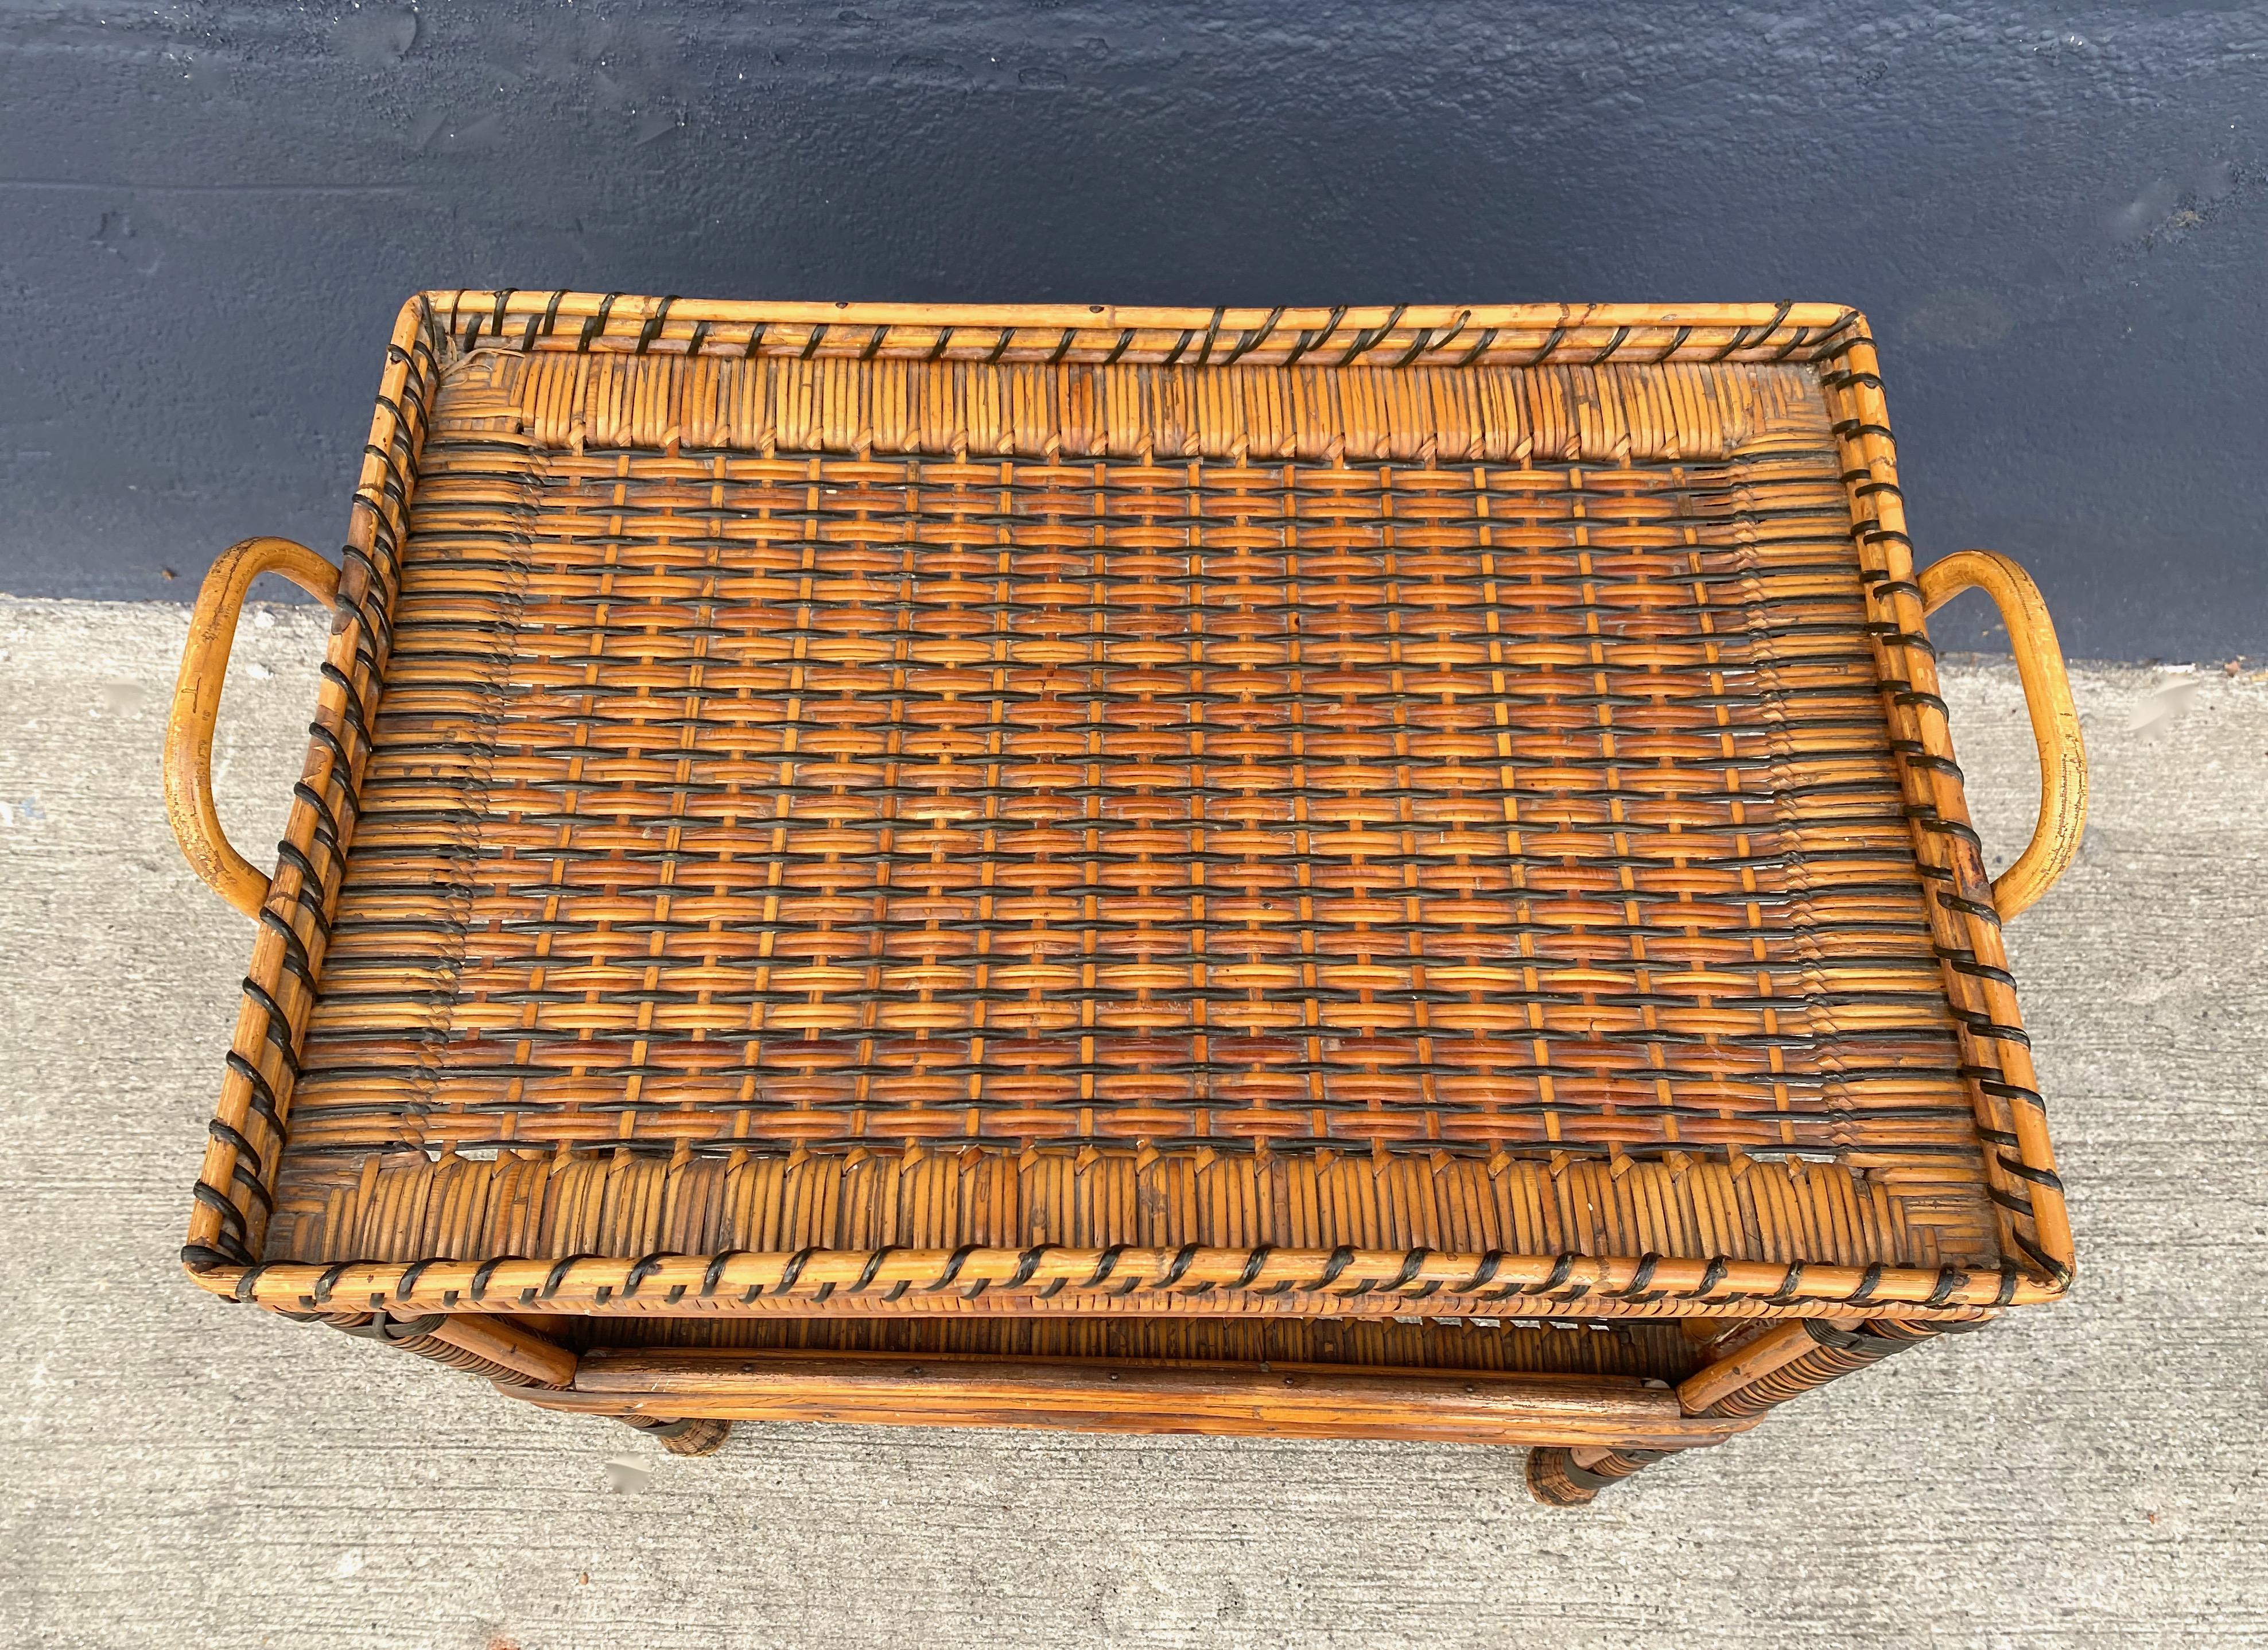 20th Century French Woven Rattan Side Table, c. 1930-1940